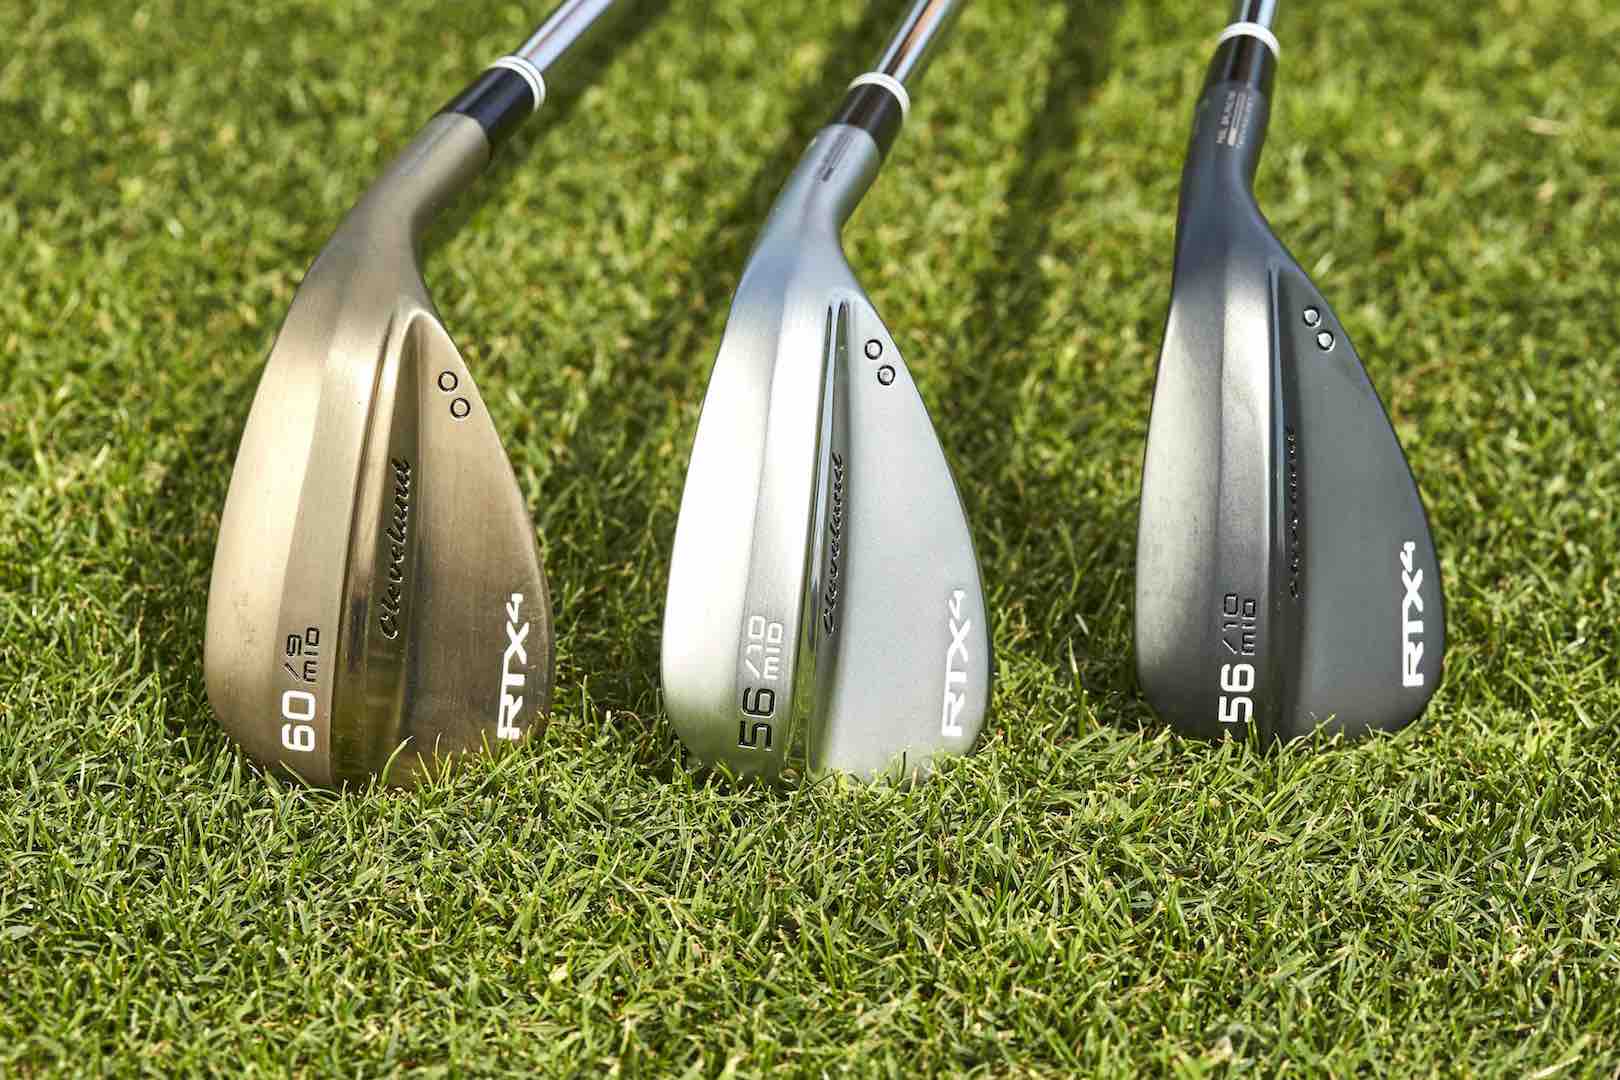 Cleveland Golf introduces new RTX 4 